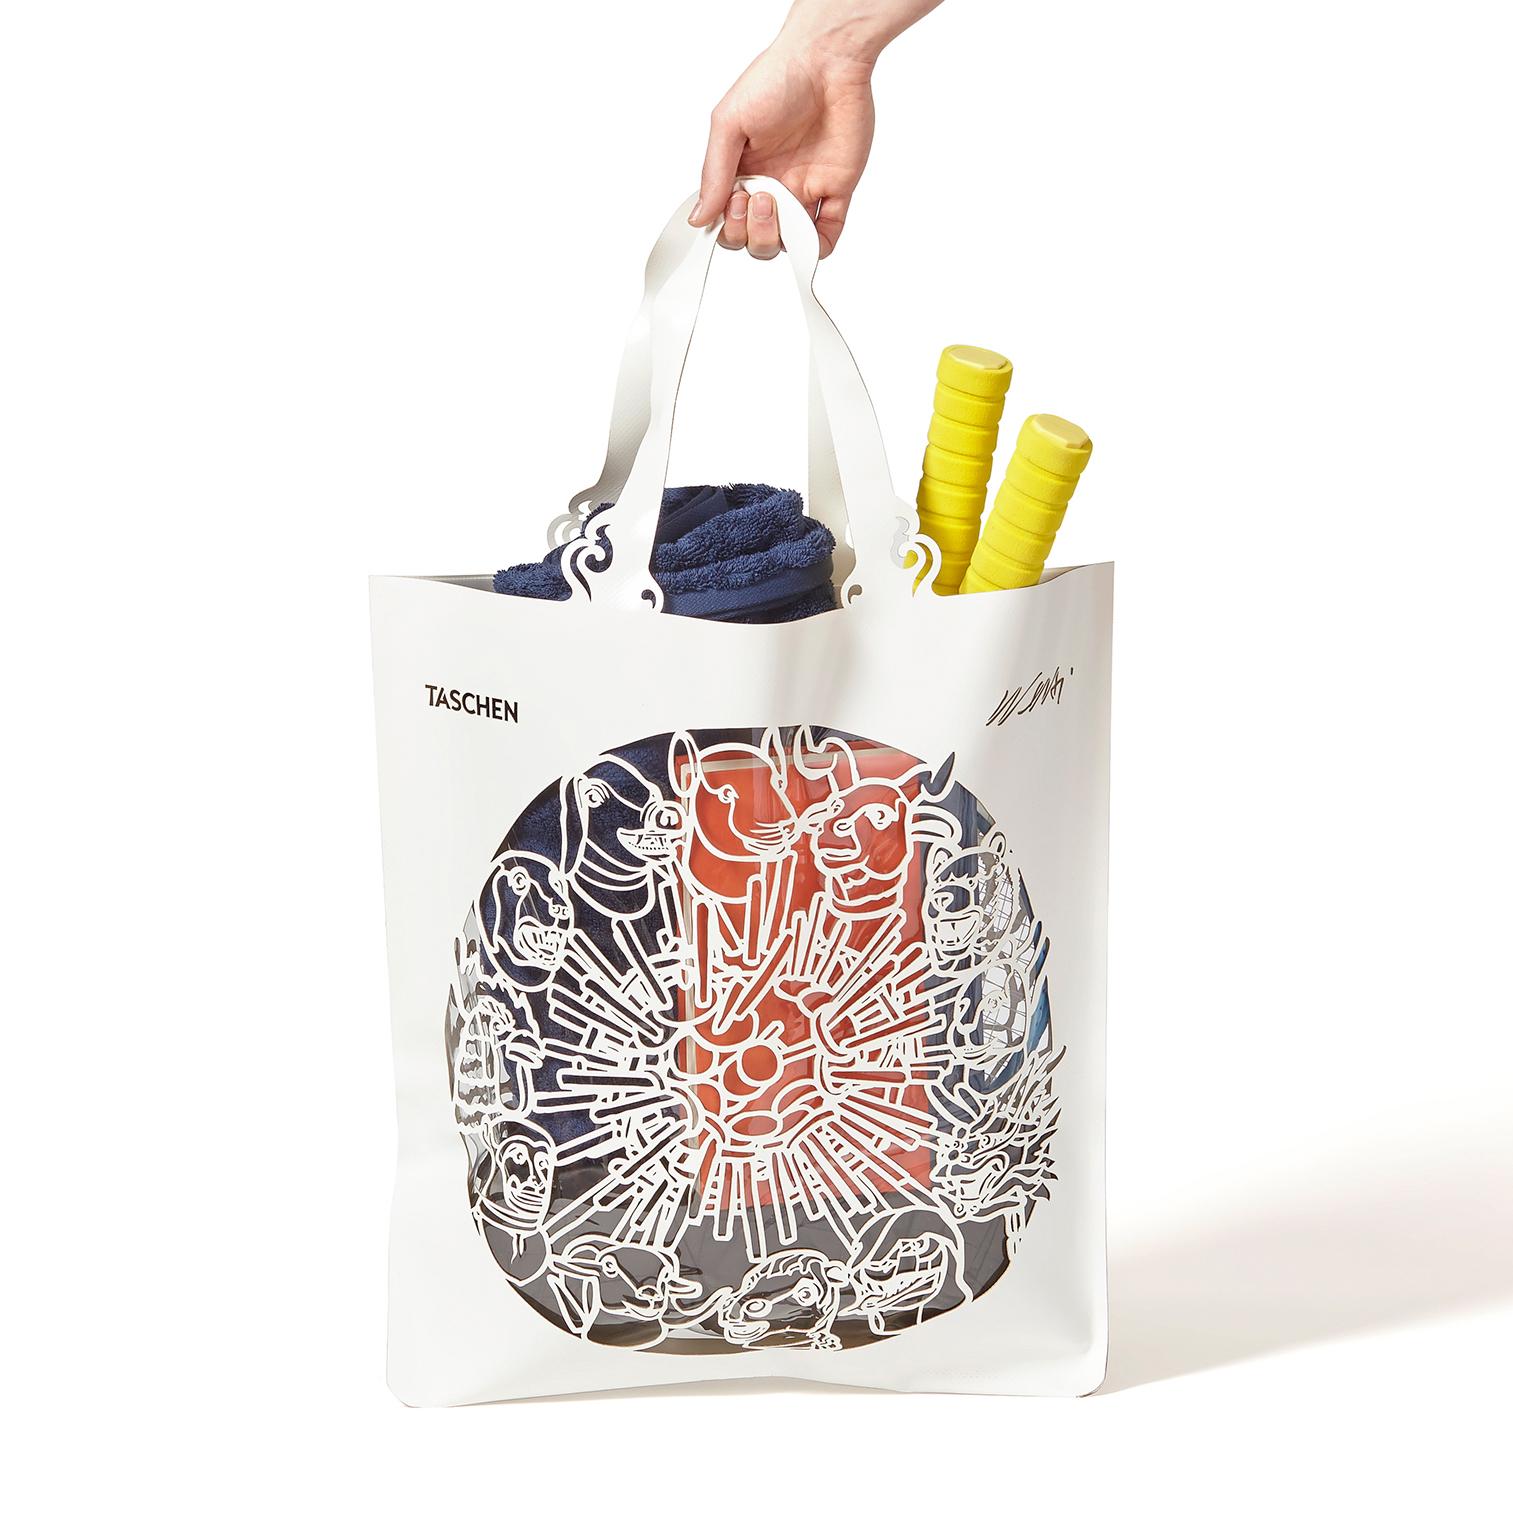 White PVC bag with transparent inlay
Measures: 18.5 x 25.4 inches (without handles)
Edition of 2,500
Custom gift box

This limited edition tote by Ai Weiwei is both the ultimate beach-to-dinner tote and beautiful enough to frame and hang on your